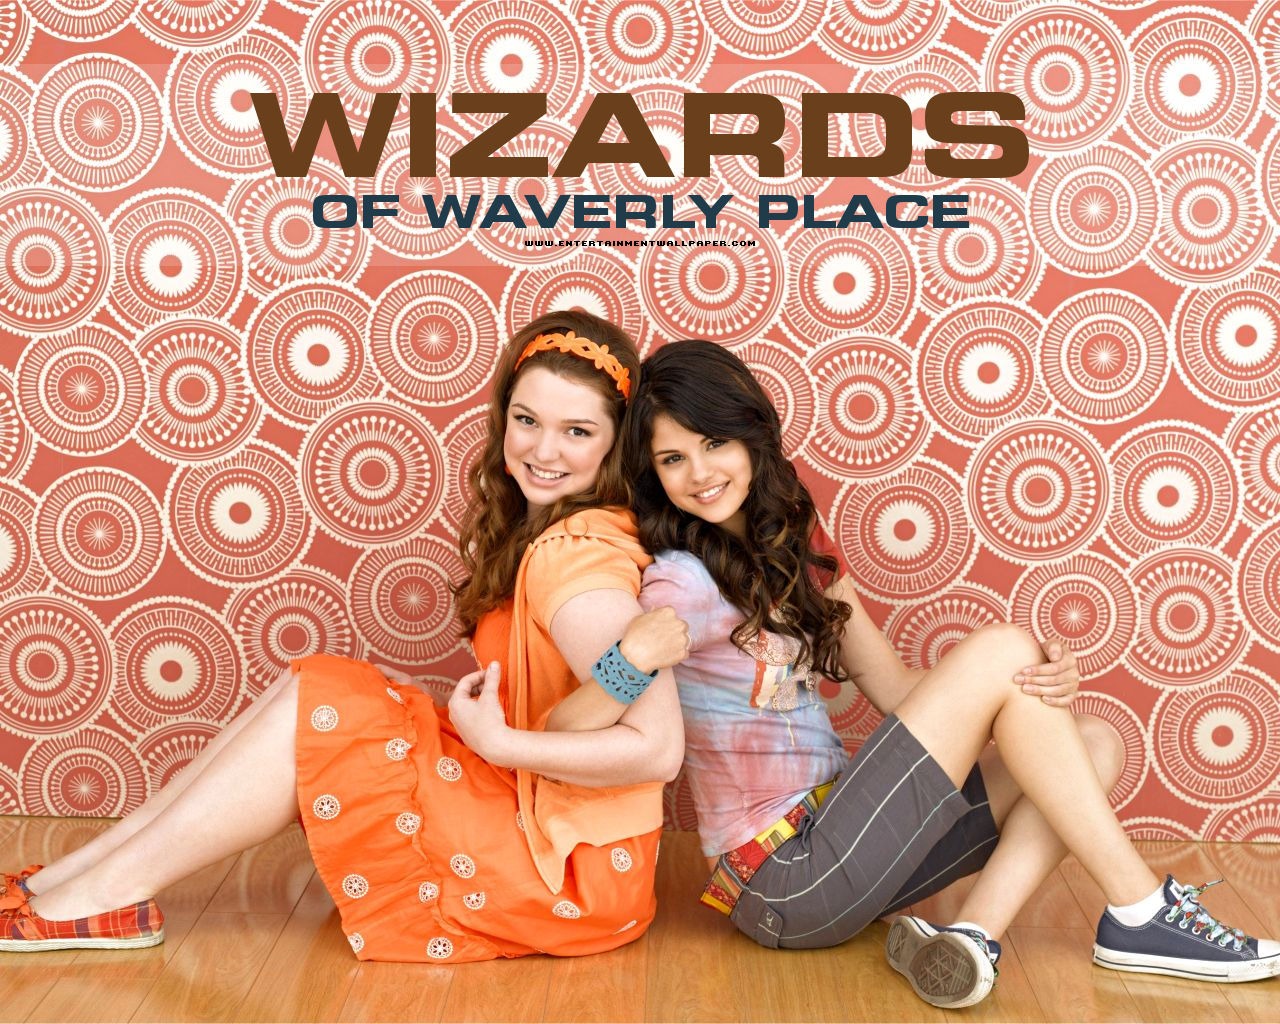 Wizards of Waverly Place 少年魔法師 #9 - 1280x1024